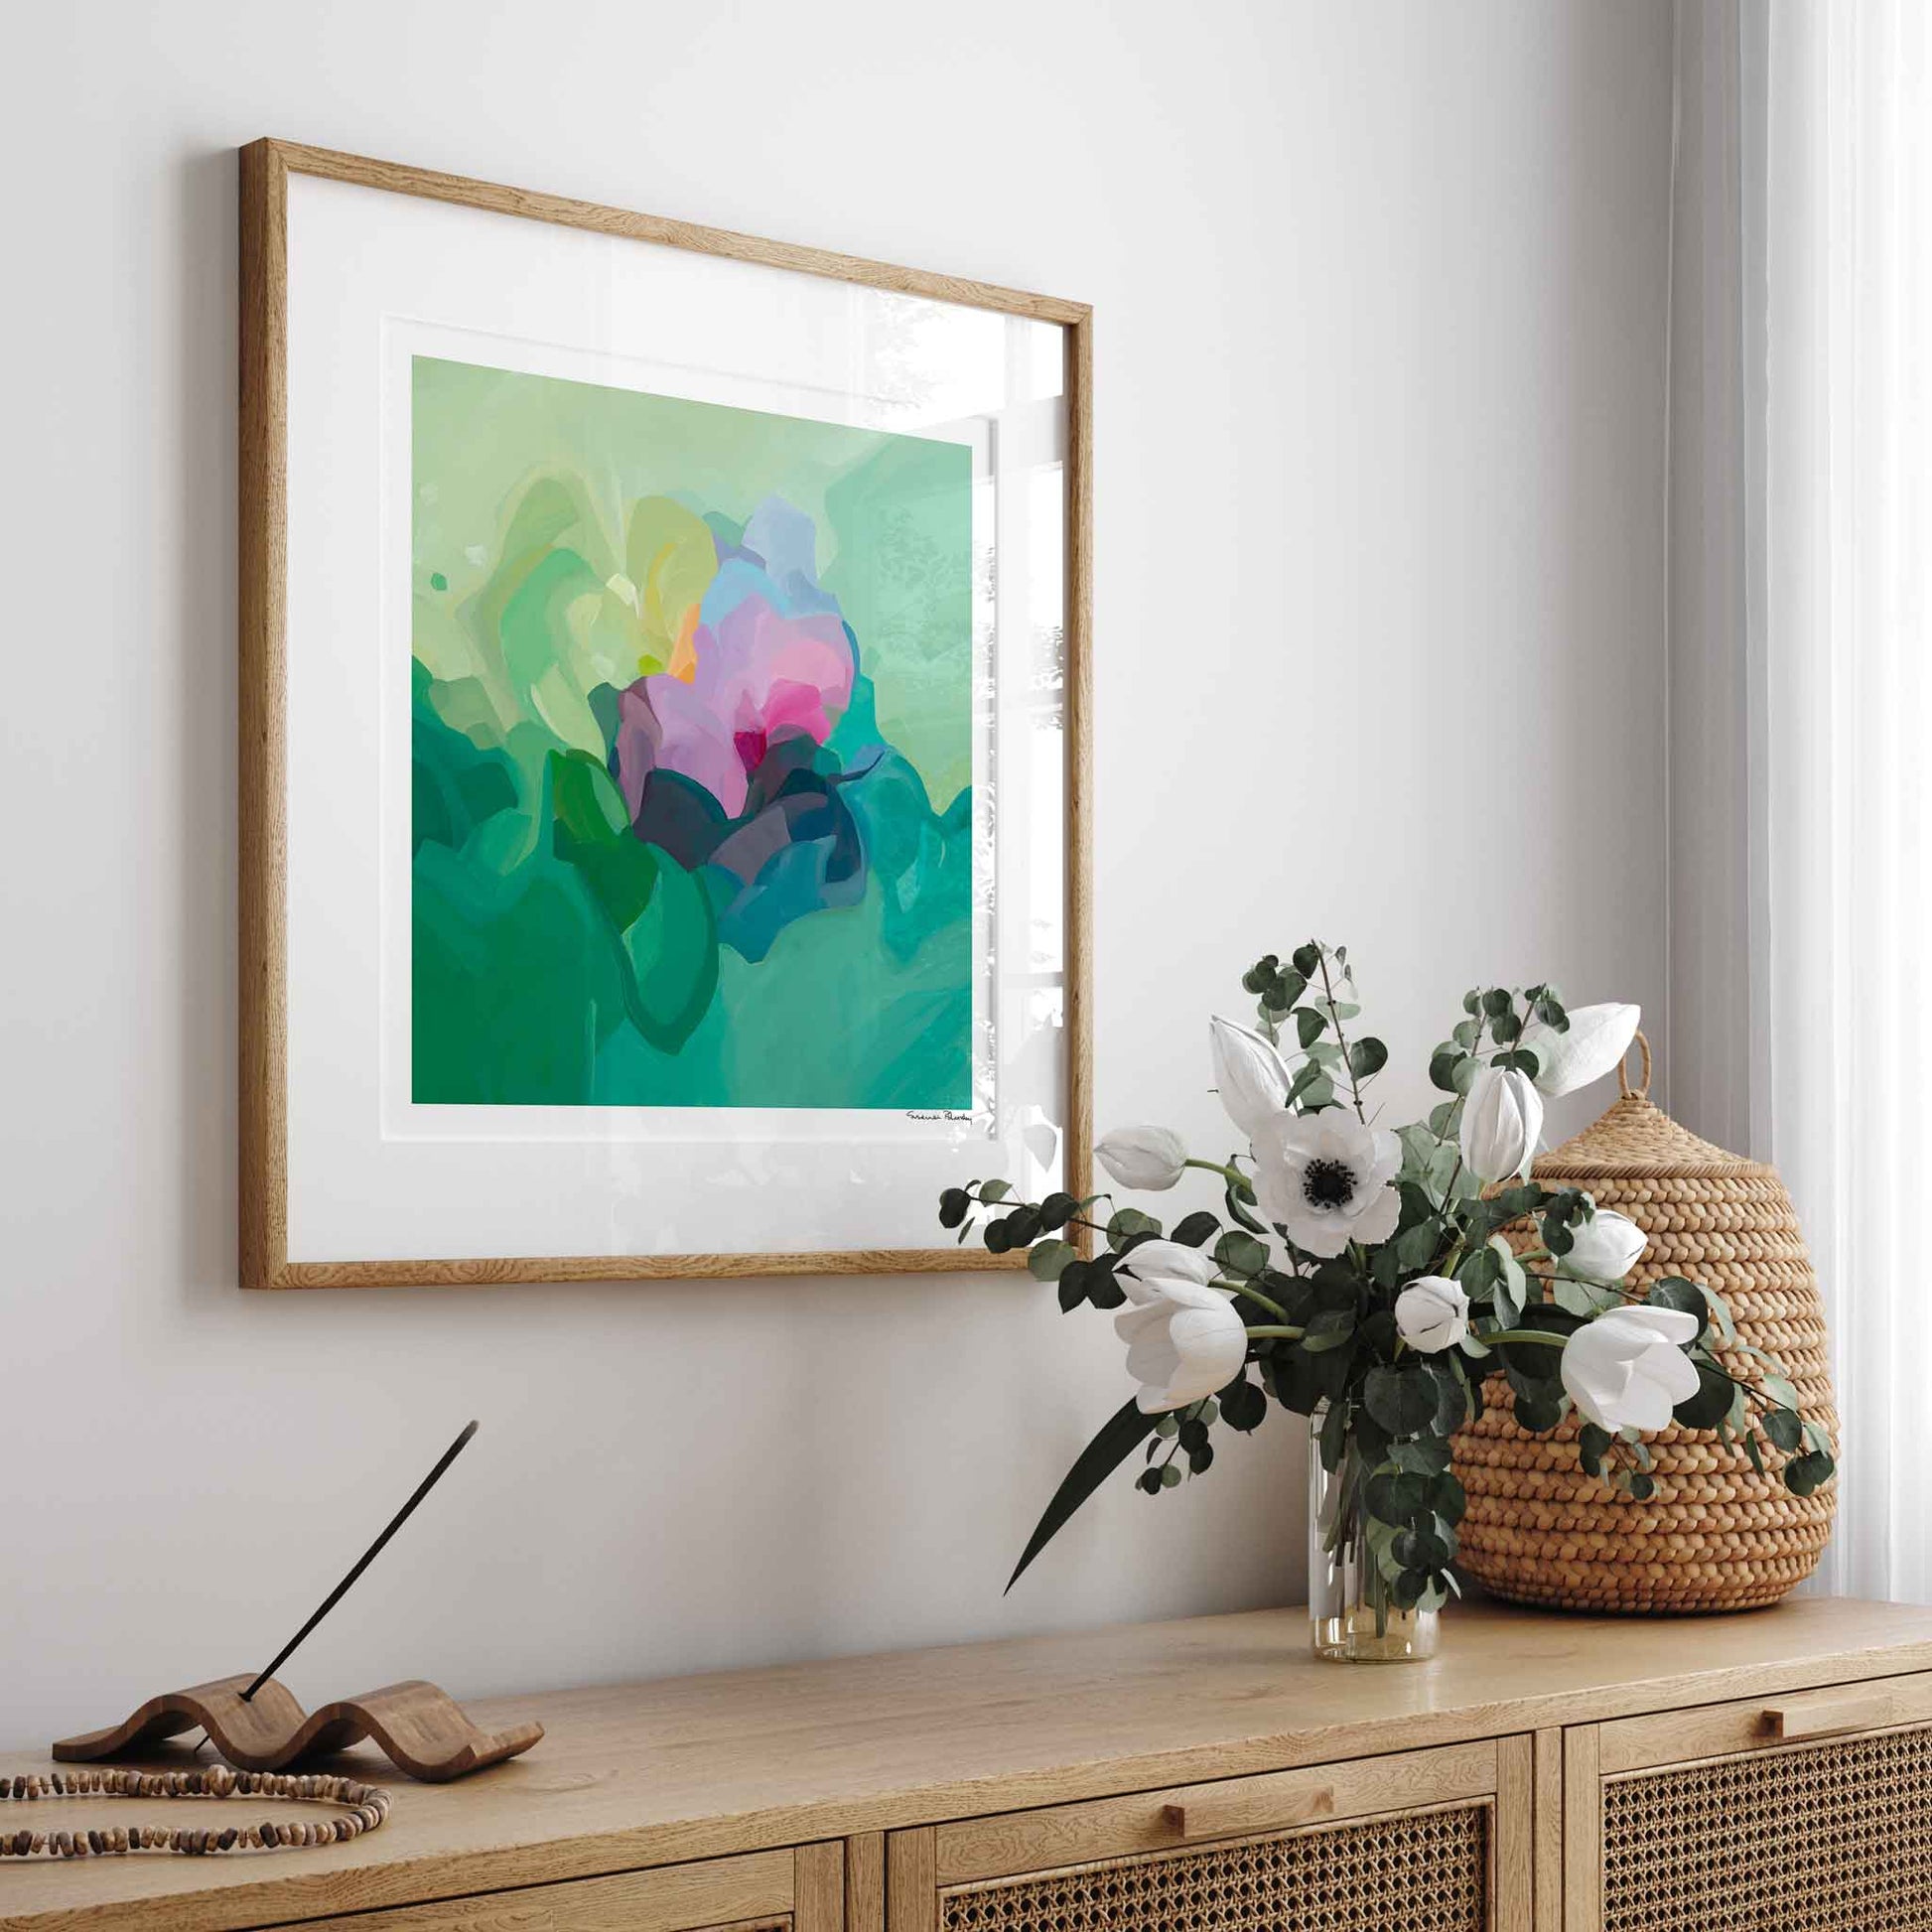 emerald green and jade acrylic abstract painting art print framed over sideboard 24x24